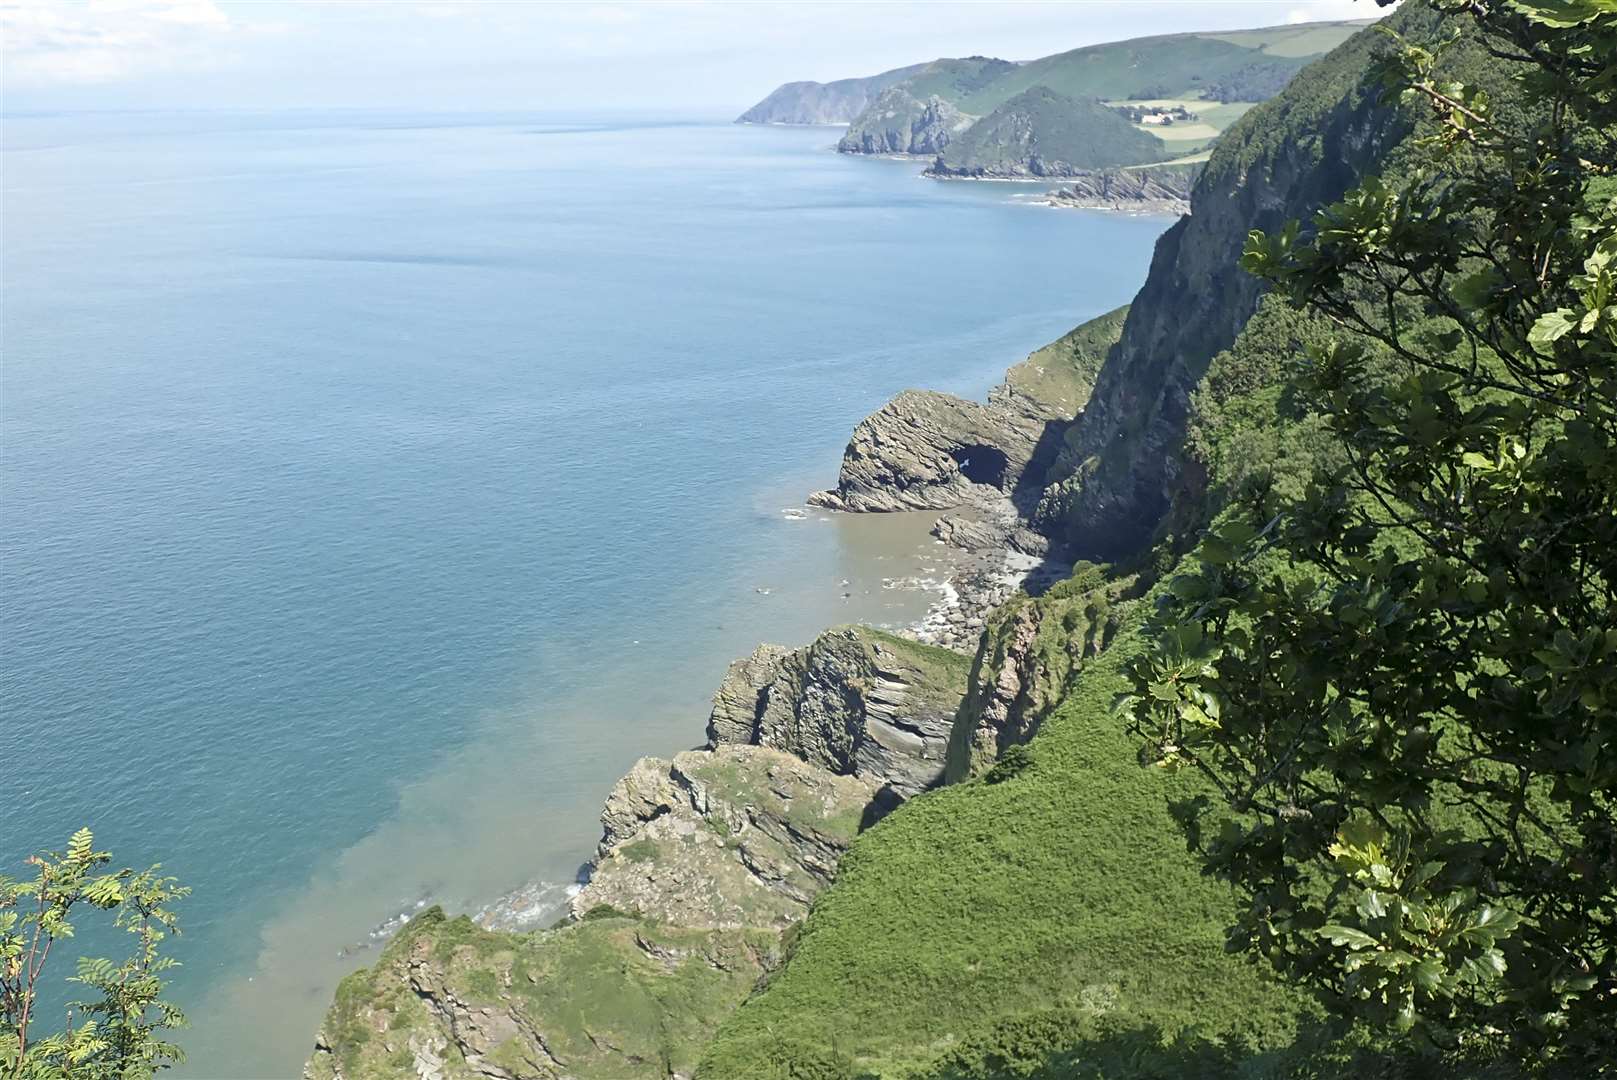 The fossil forest was discovered by scientists in sandstone cliffs along the Devon and Somerset coast (Neil Davies/University of Cambridge/PA)